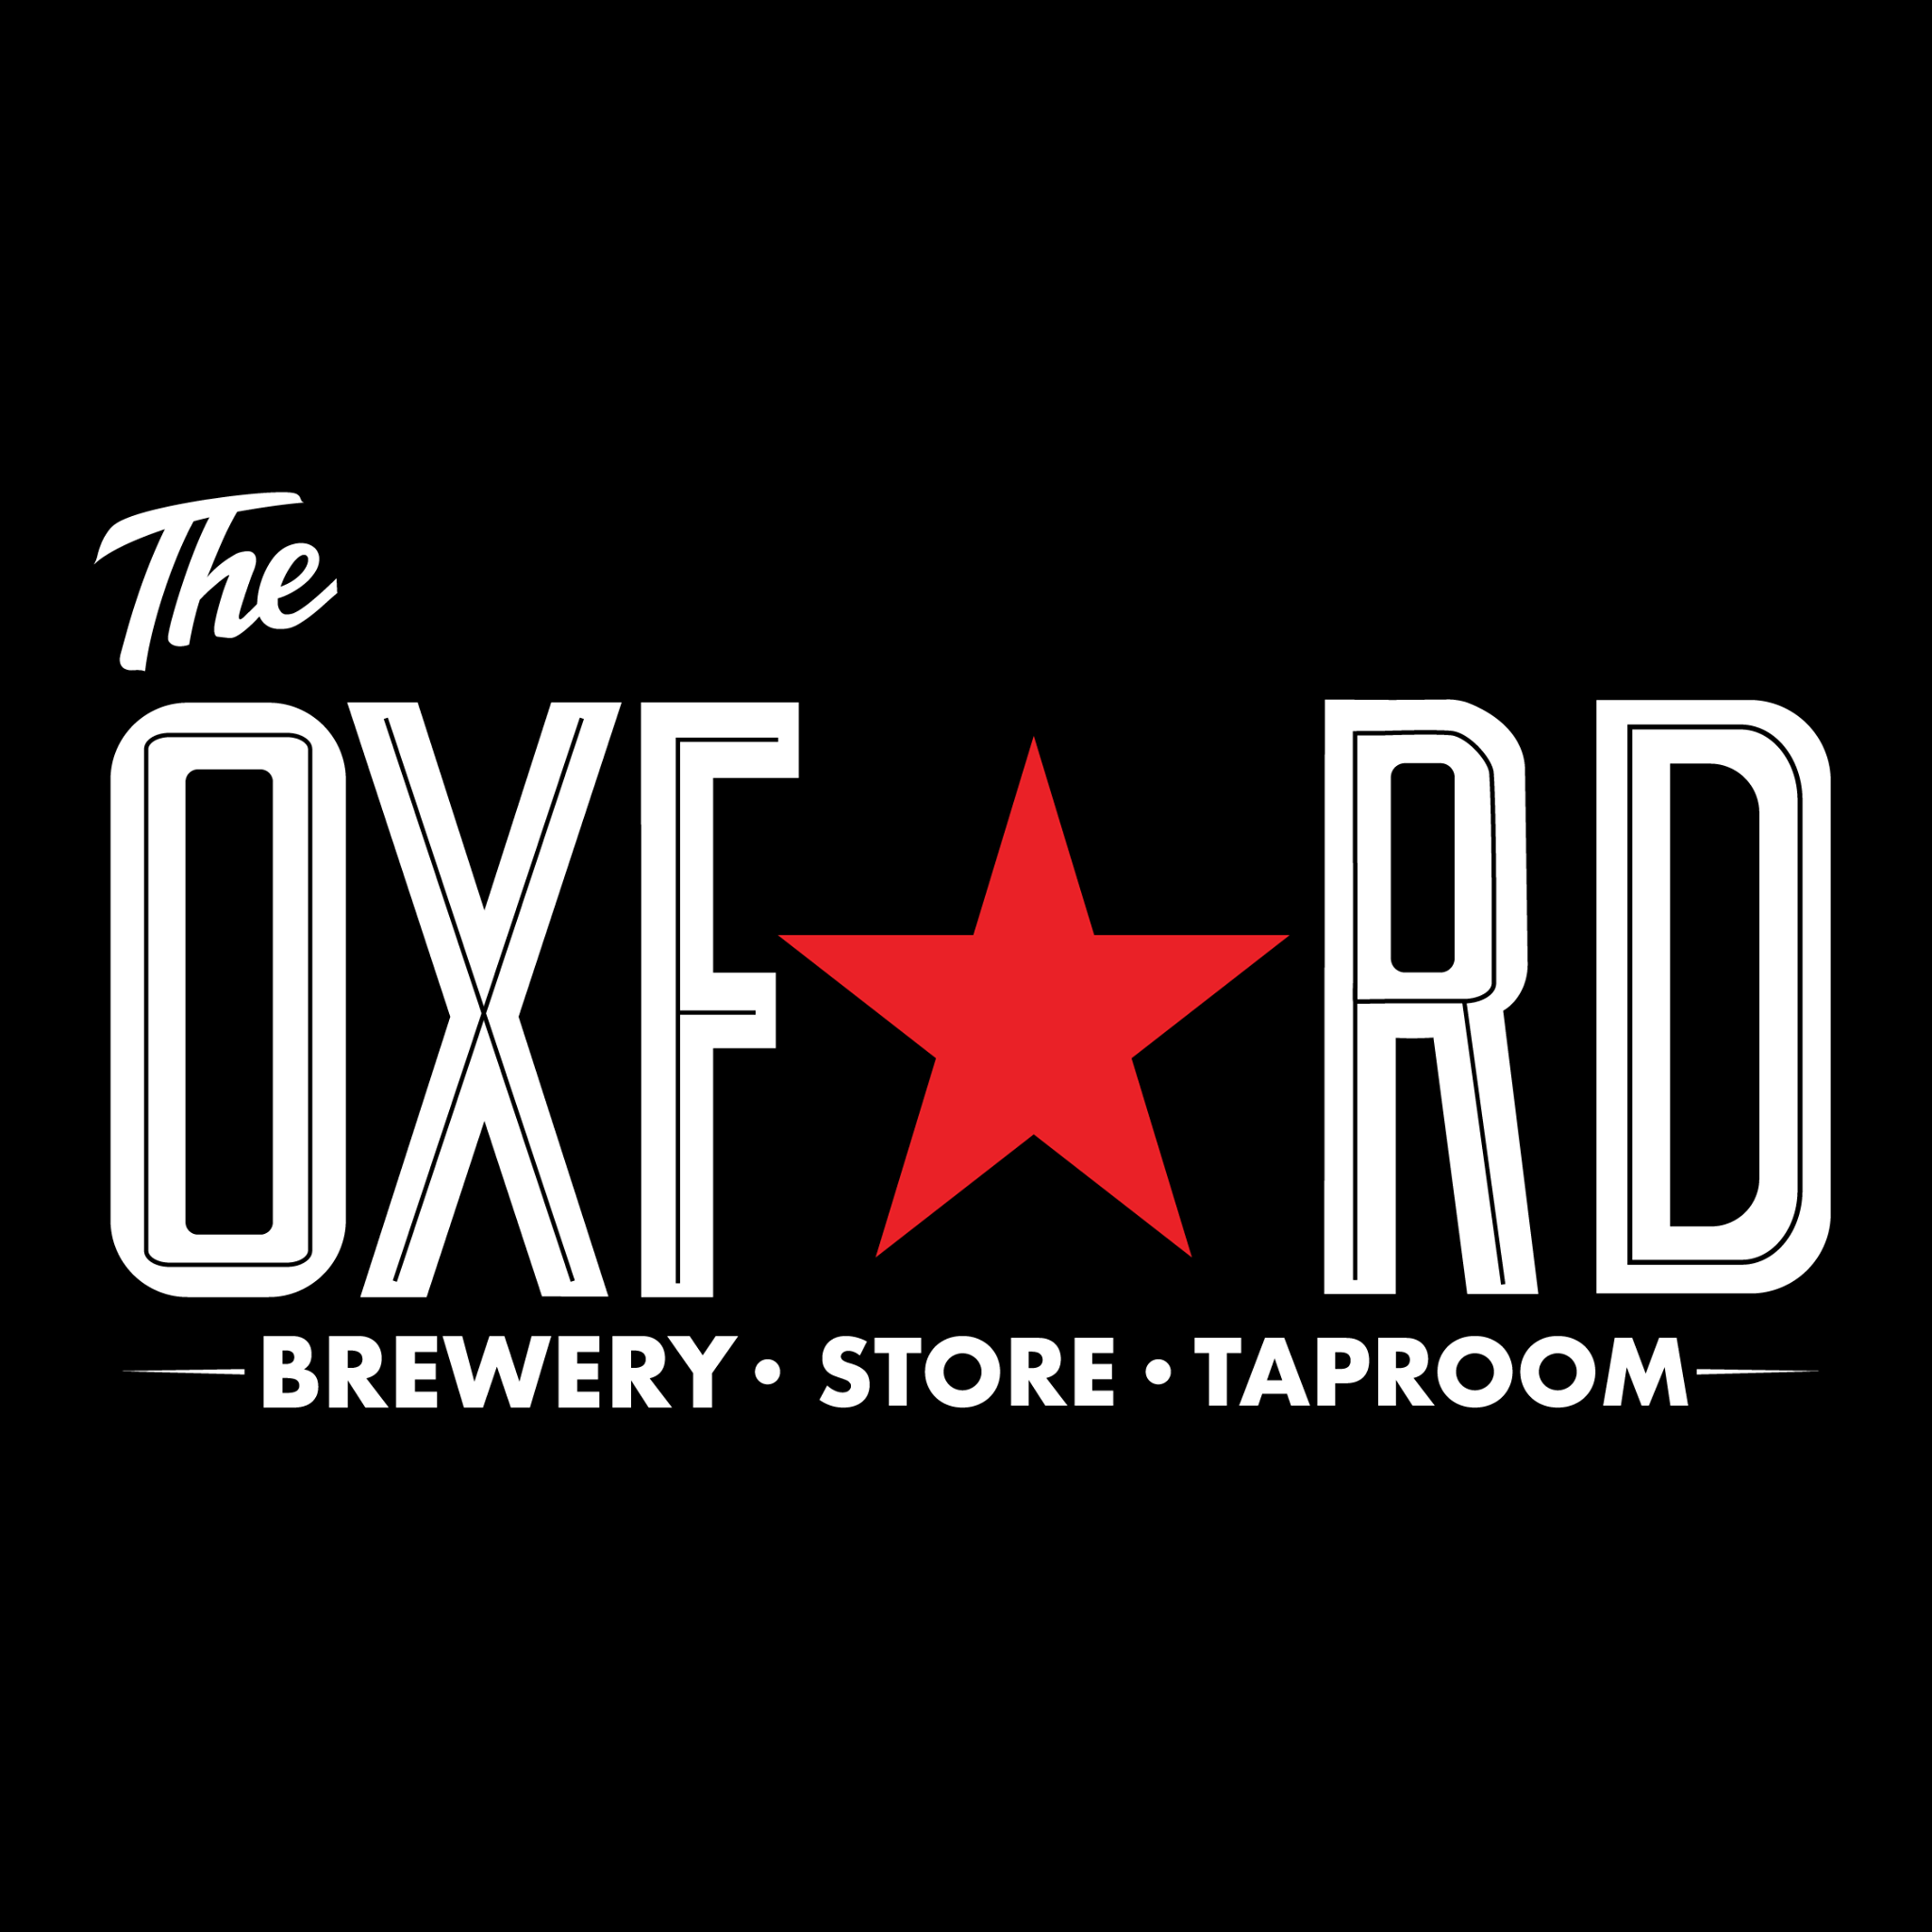 Garrison Brewing Co. - The Oxford Taproom